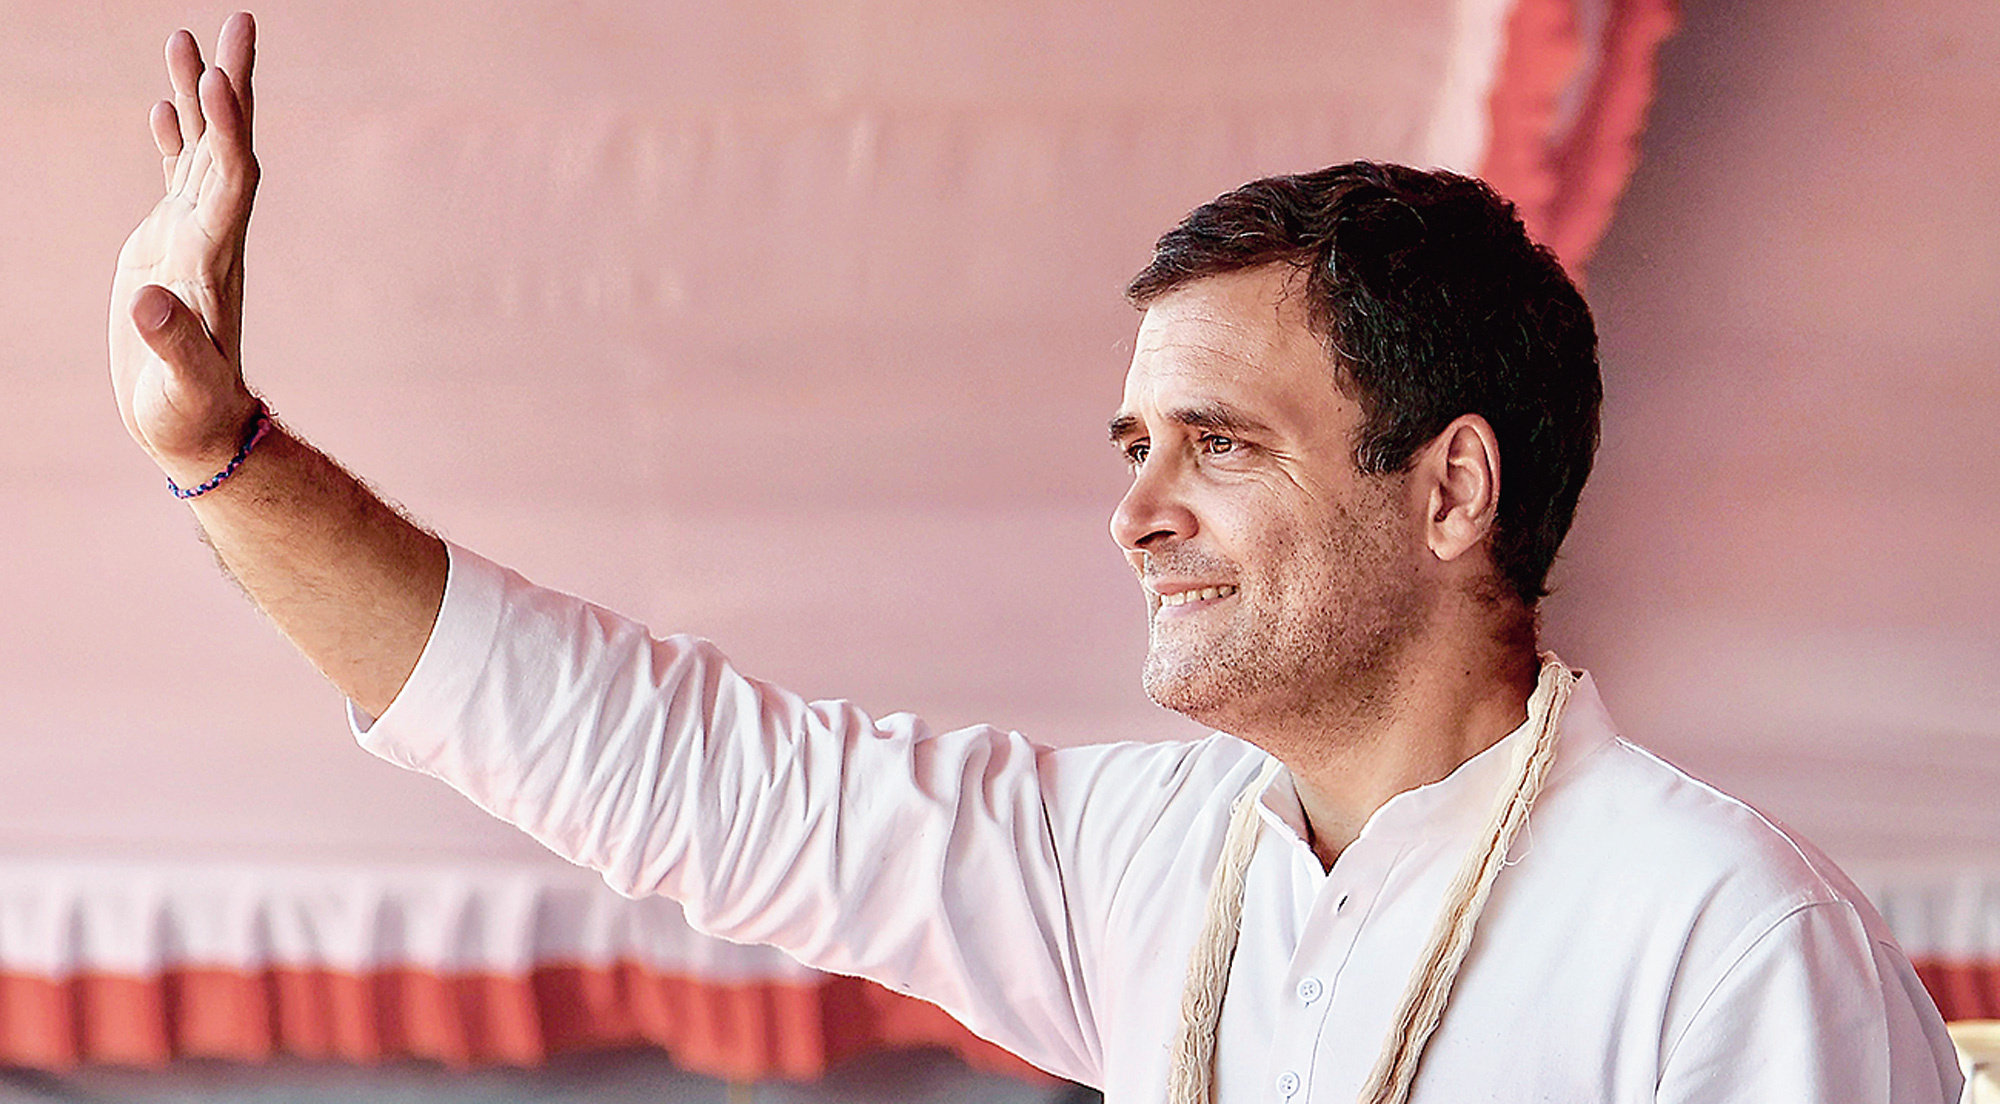 Rahul Gandhi's citizenship: The government's question, its timing and history